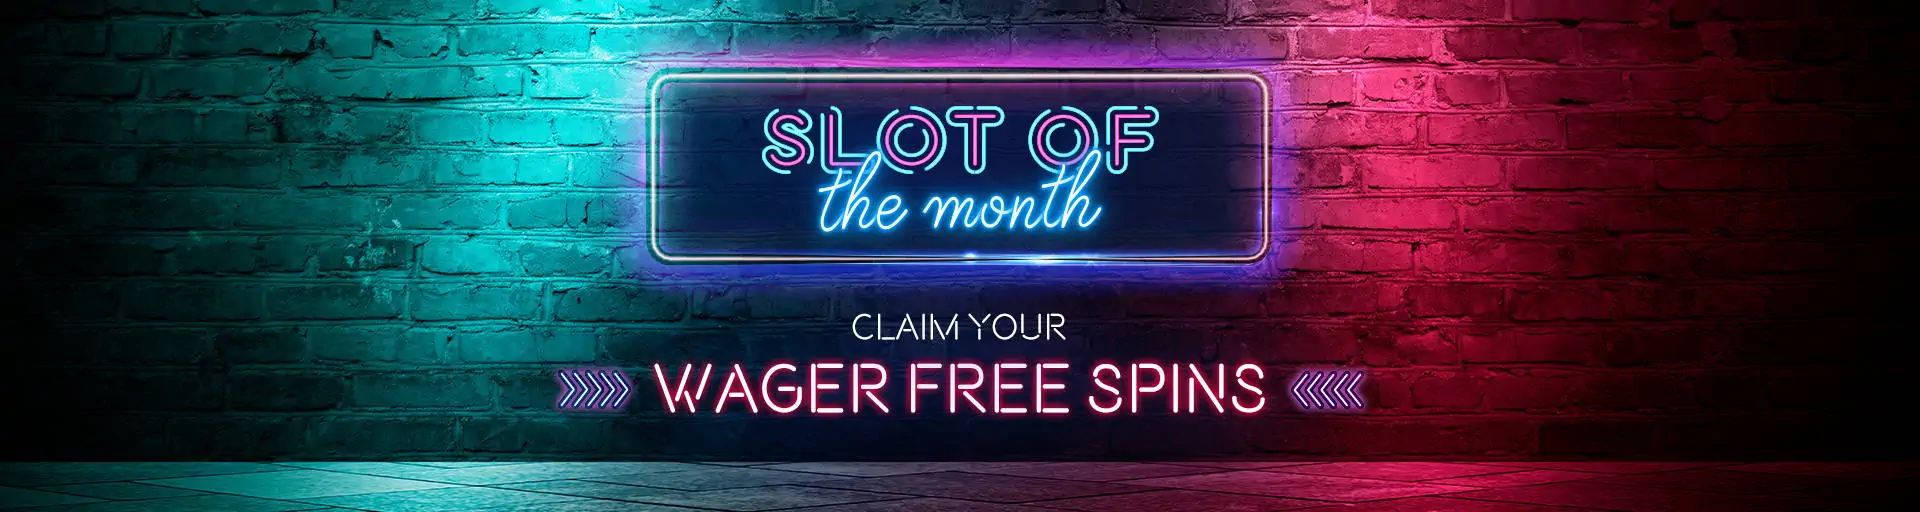 Favorite online casino slots Resources For 2021